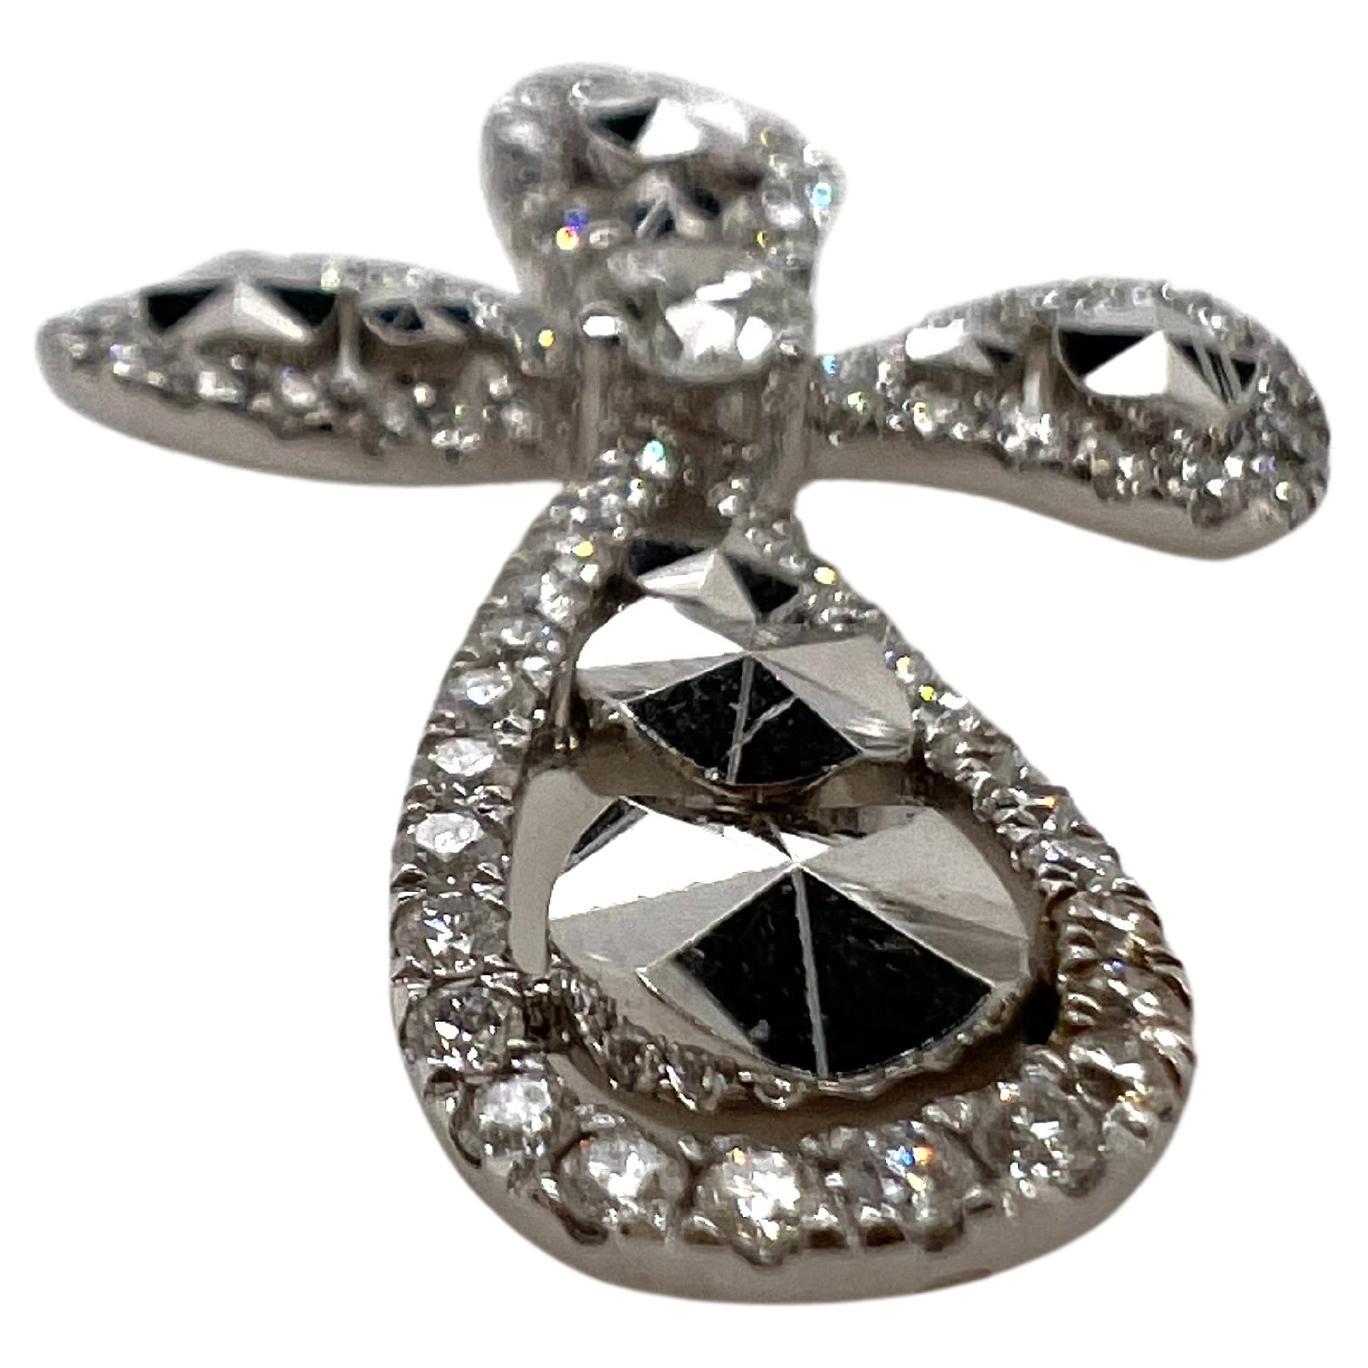 18k white gold diamond cross with diamond cut gold for an extra  unique appearance.  The round diamonds form along the exterior of the cross and also has a 1 single diamond in the center.  The diamond cut gold also comprises the interior to give the